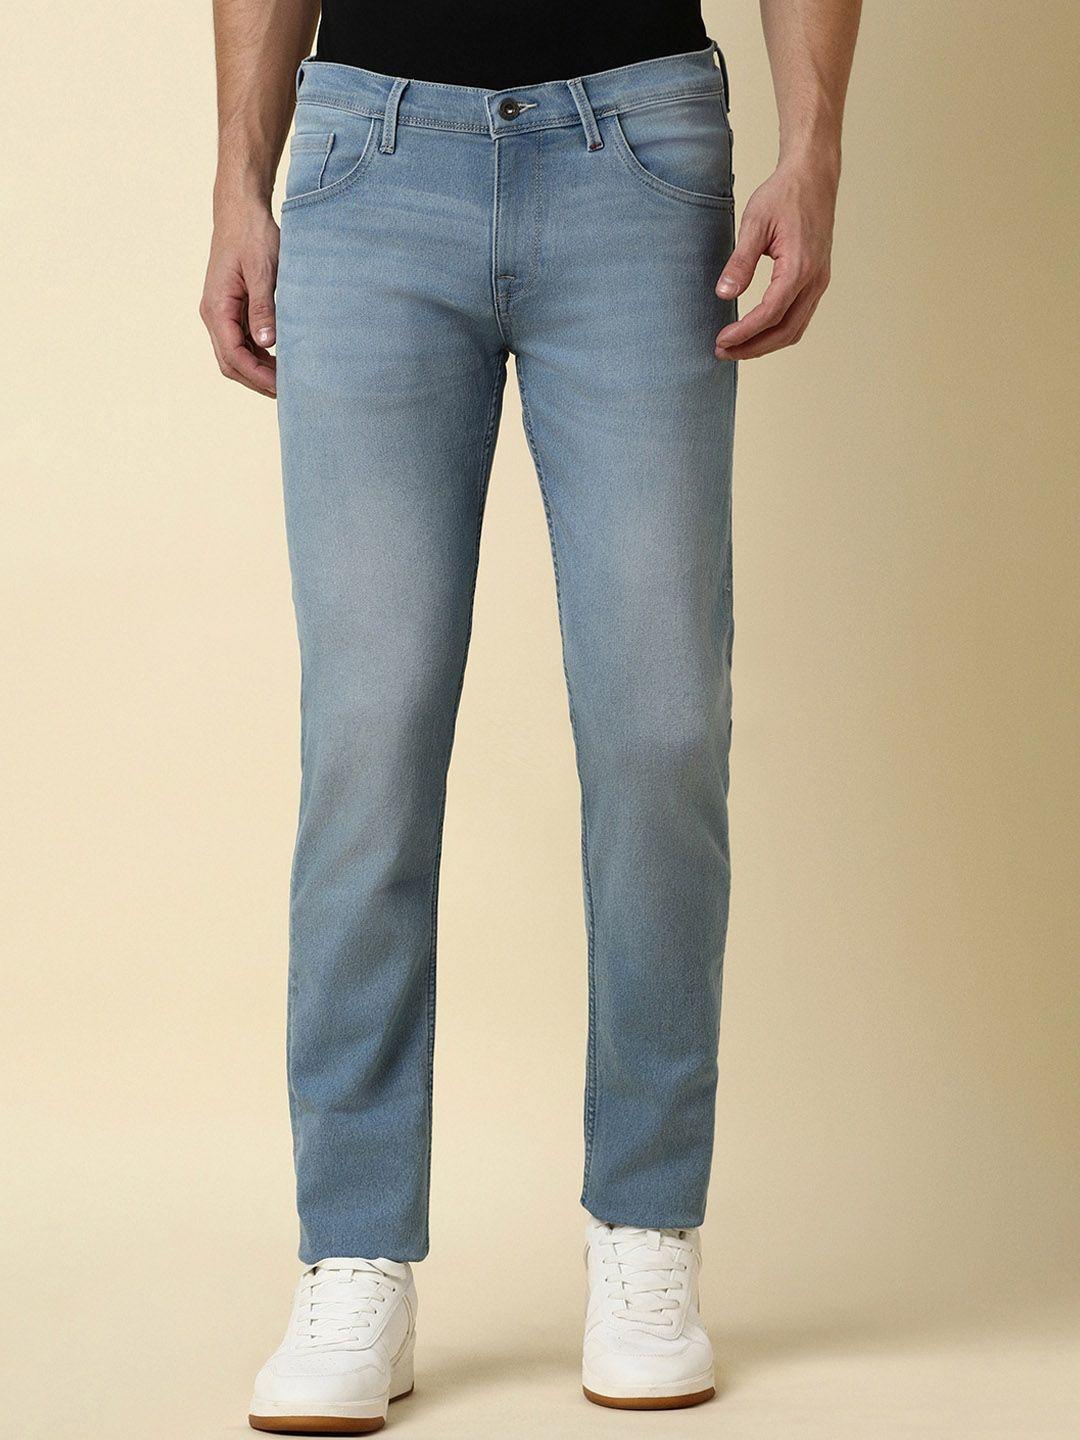 allen solly men mid rise skinny fit clean look stretchable jeans